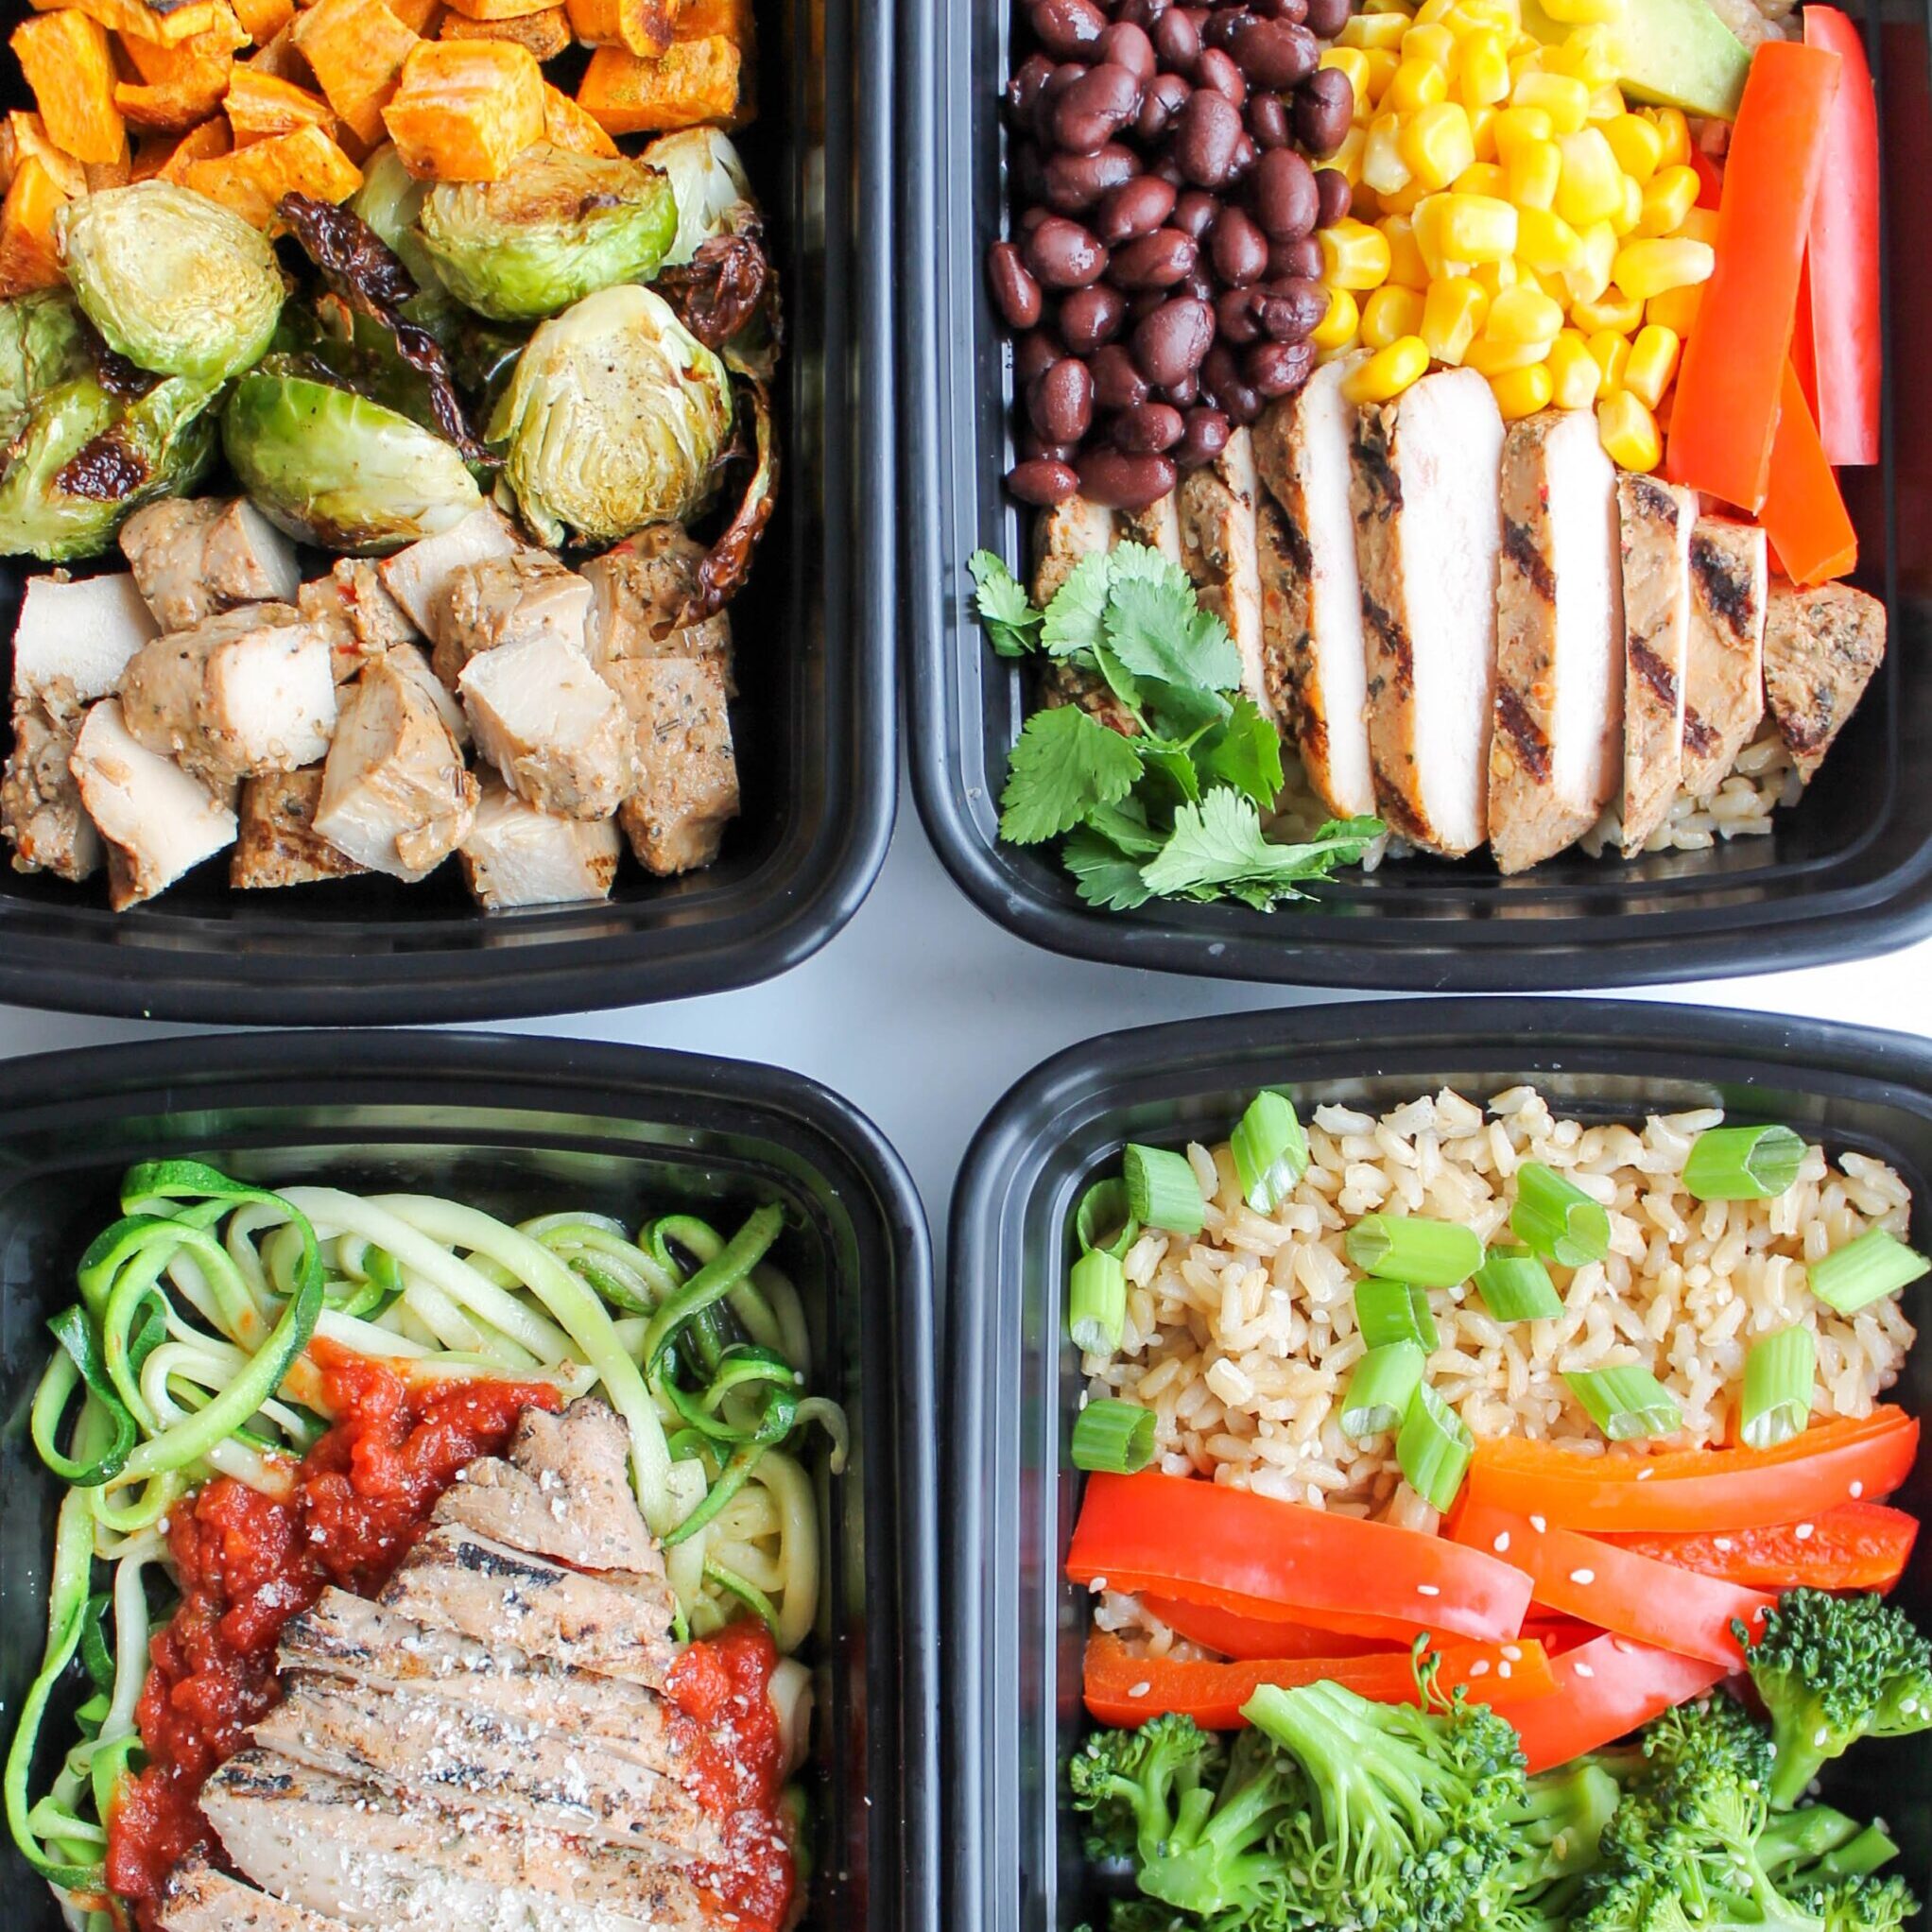 Prepared meals delivered to San Rafael, Larkspur, Ross, San Anselmo, Kentfield, Greenbrae, and Mill Valley